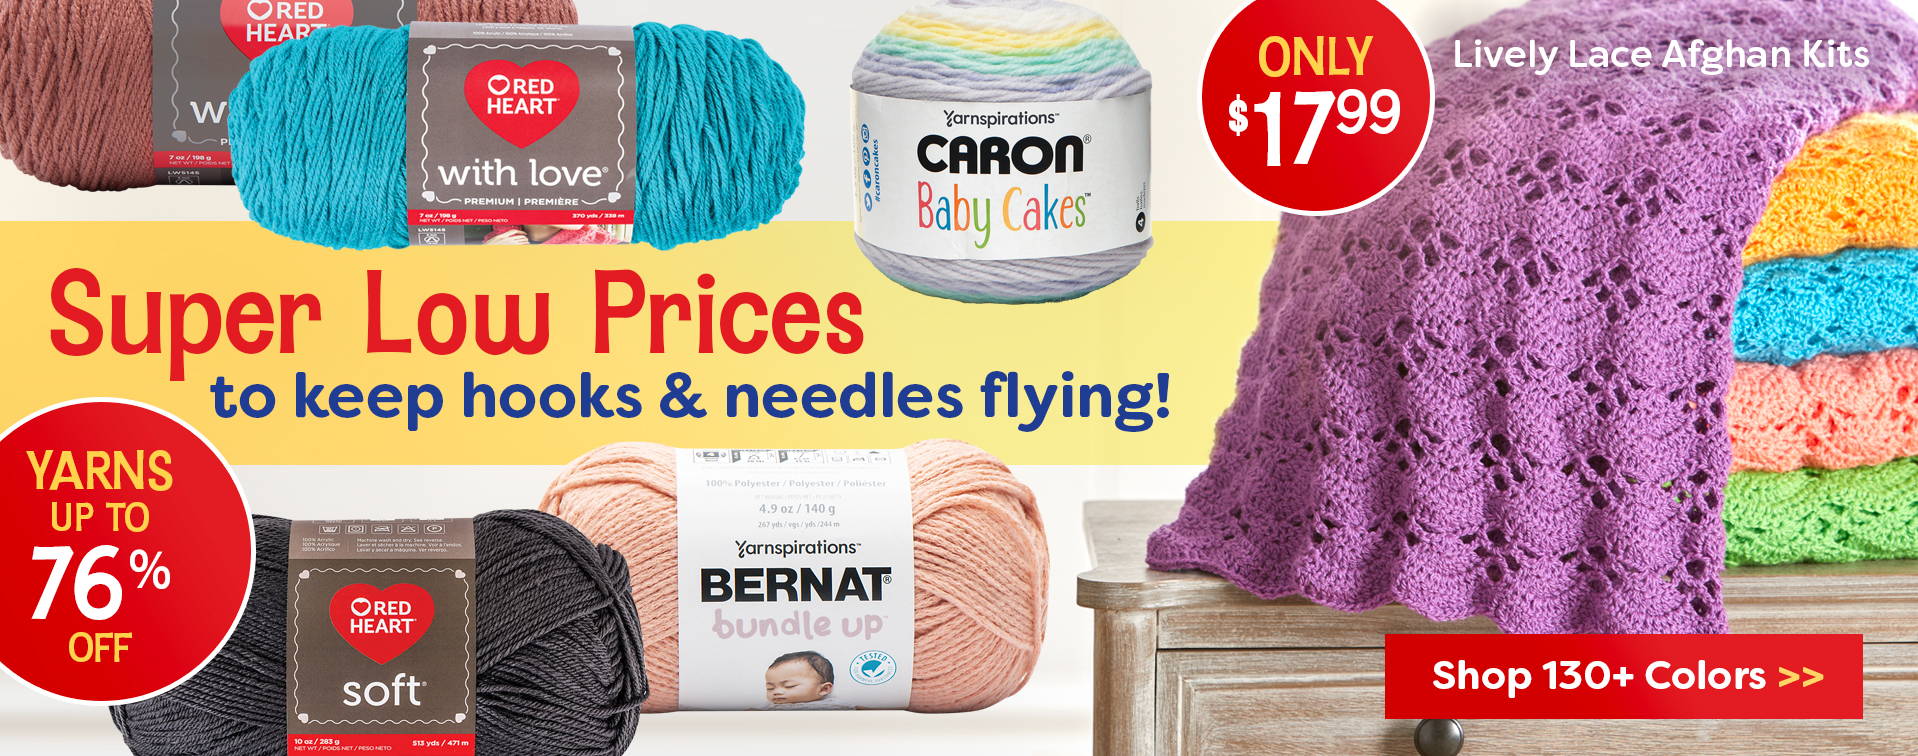 Super Low Prices up to 76% off. Shop 130+ colors of yarn. Image: Featured yarns.